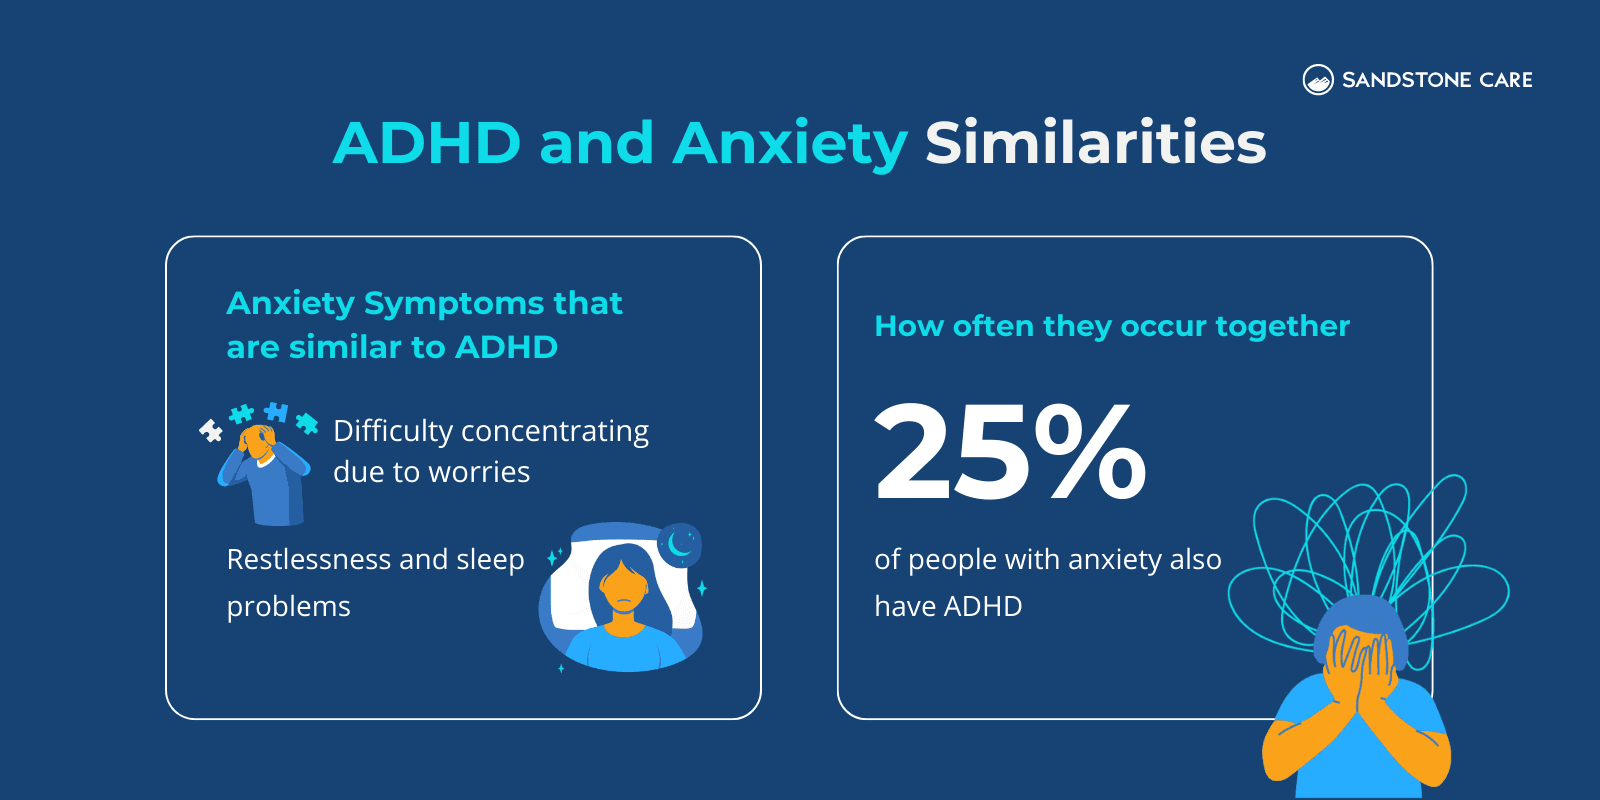 ADHD and Anxiety Similarities written above 2 cards, 1 explaining anxiety symptoms that are similar to ADHD and another card showing how often they occur together with relevant digital illustrations